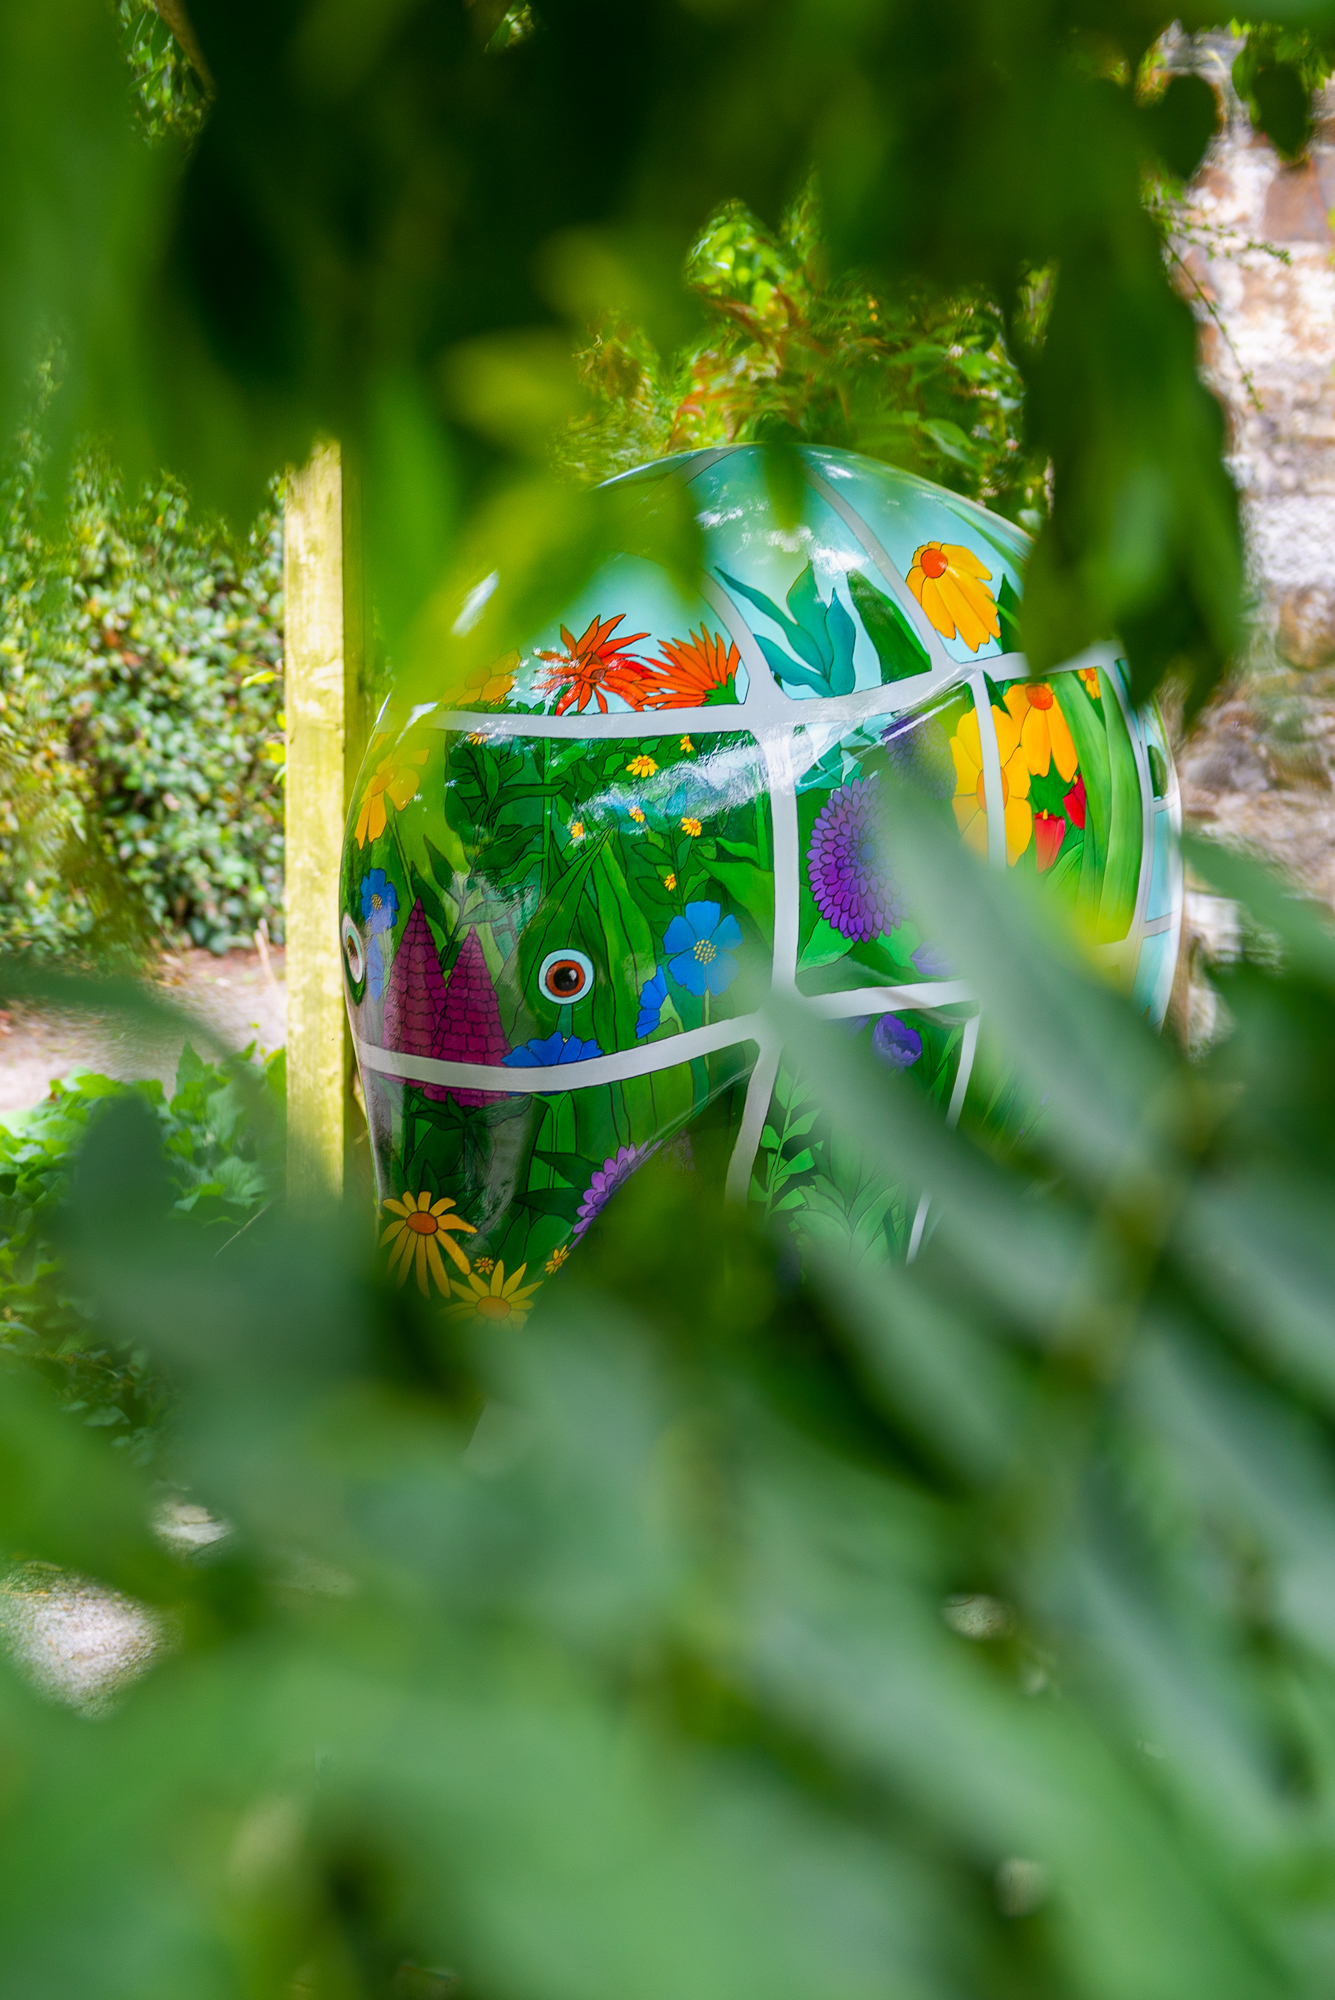 'Blooming Greenhouse' by Leah Hayler. Sponsored by St Luke's Hospice Plymouth - Image 9 of 13